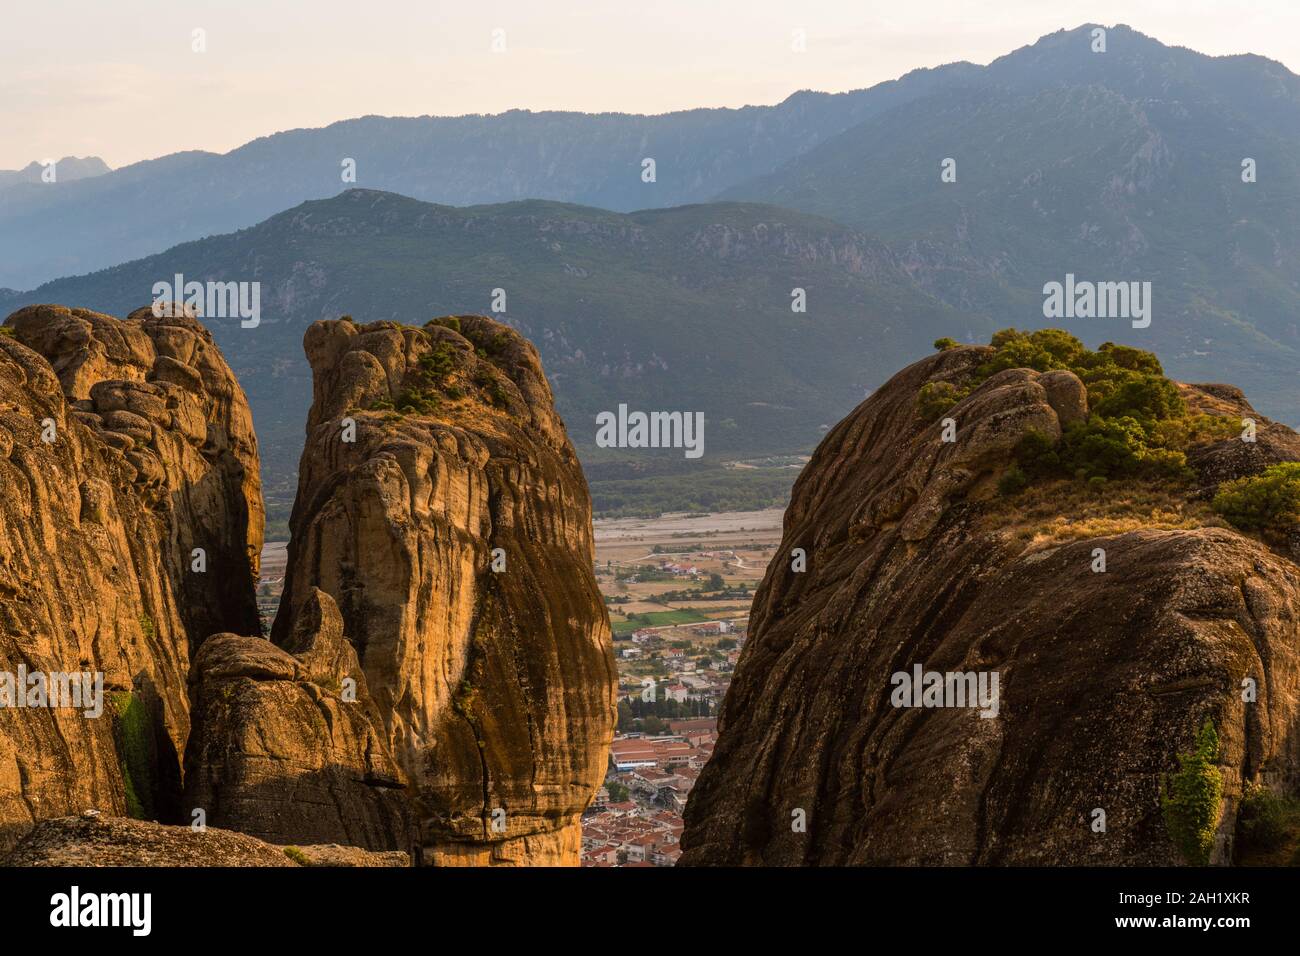 City and the high mountains in Greece horizontal Stock Photo